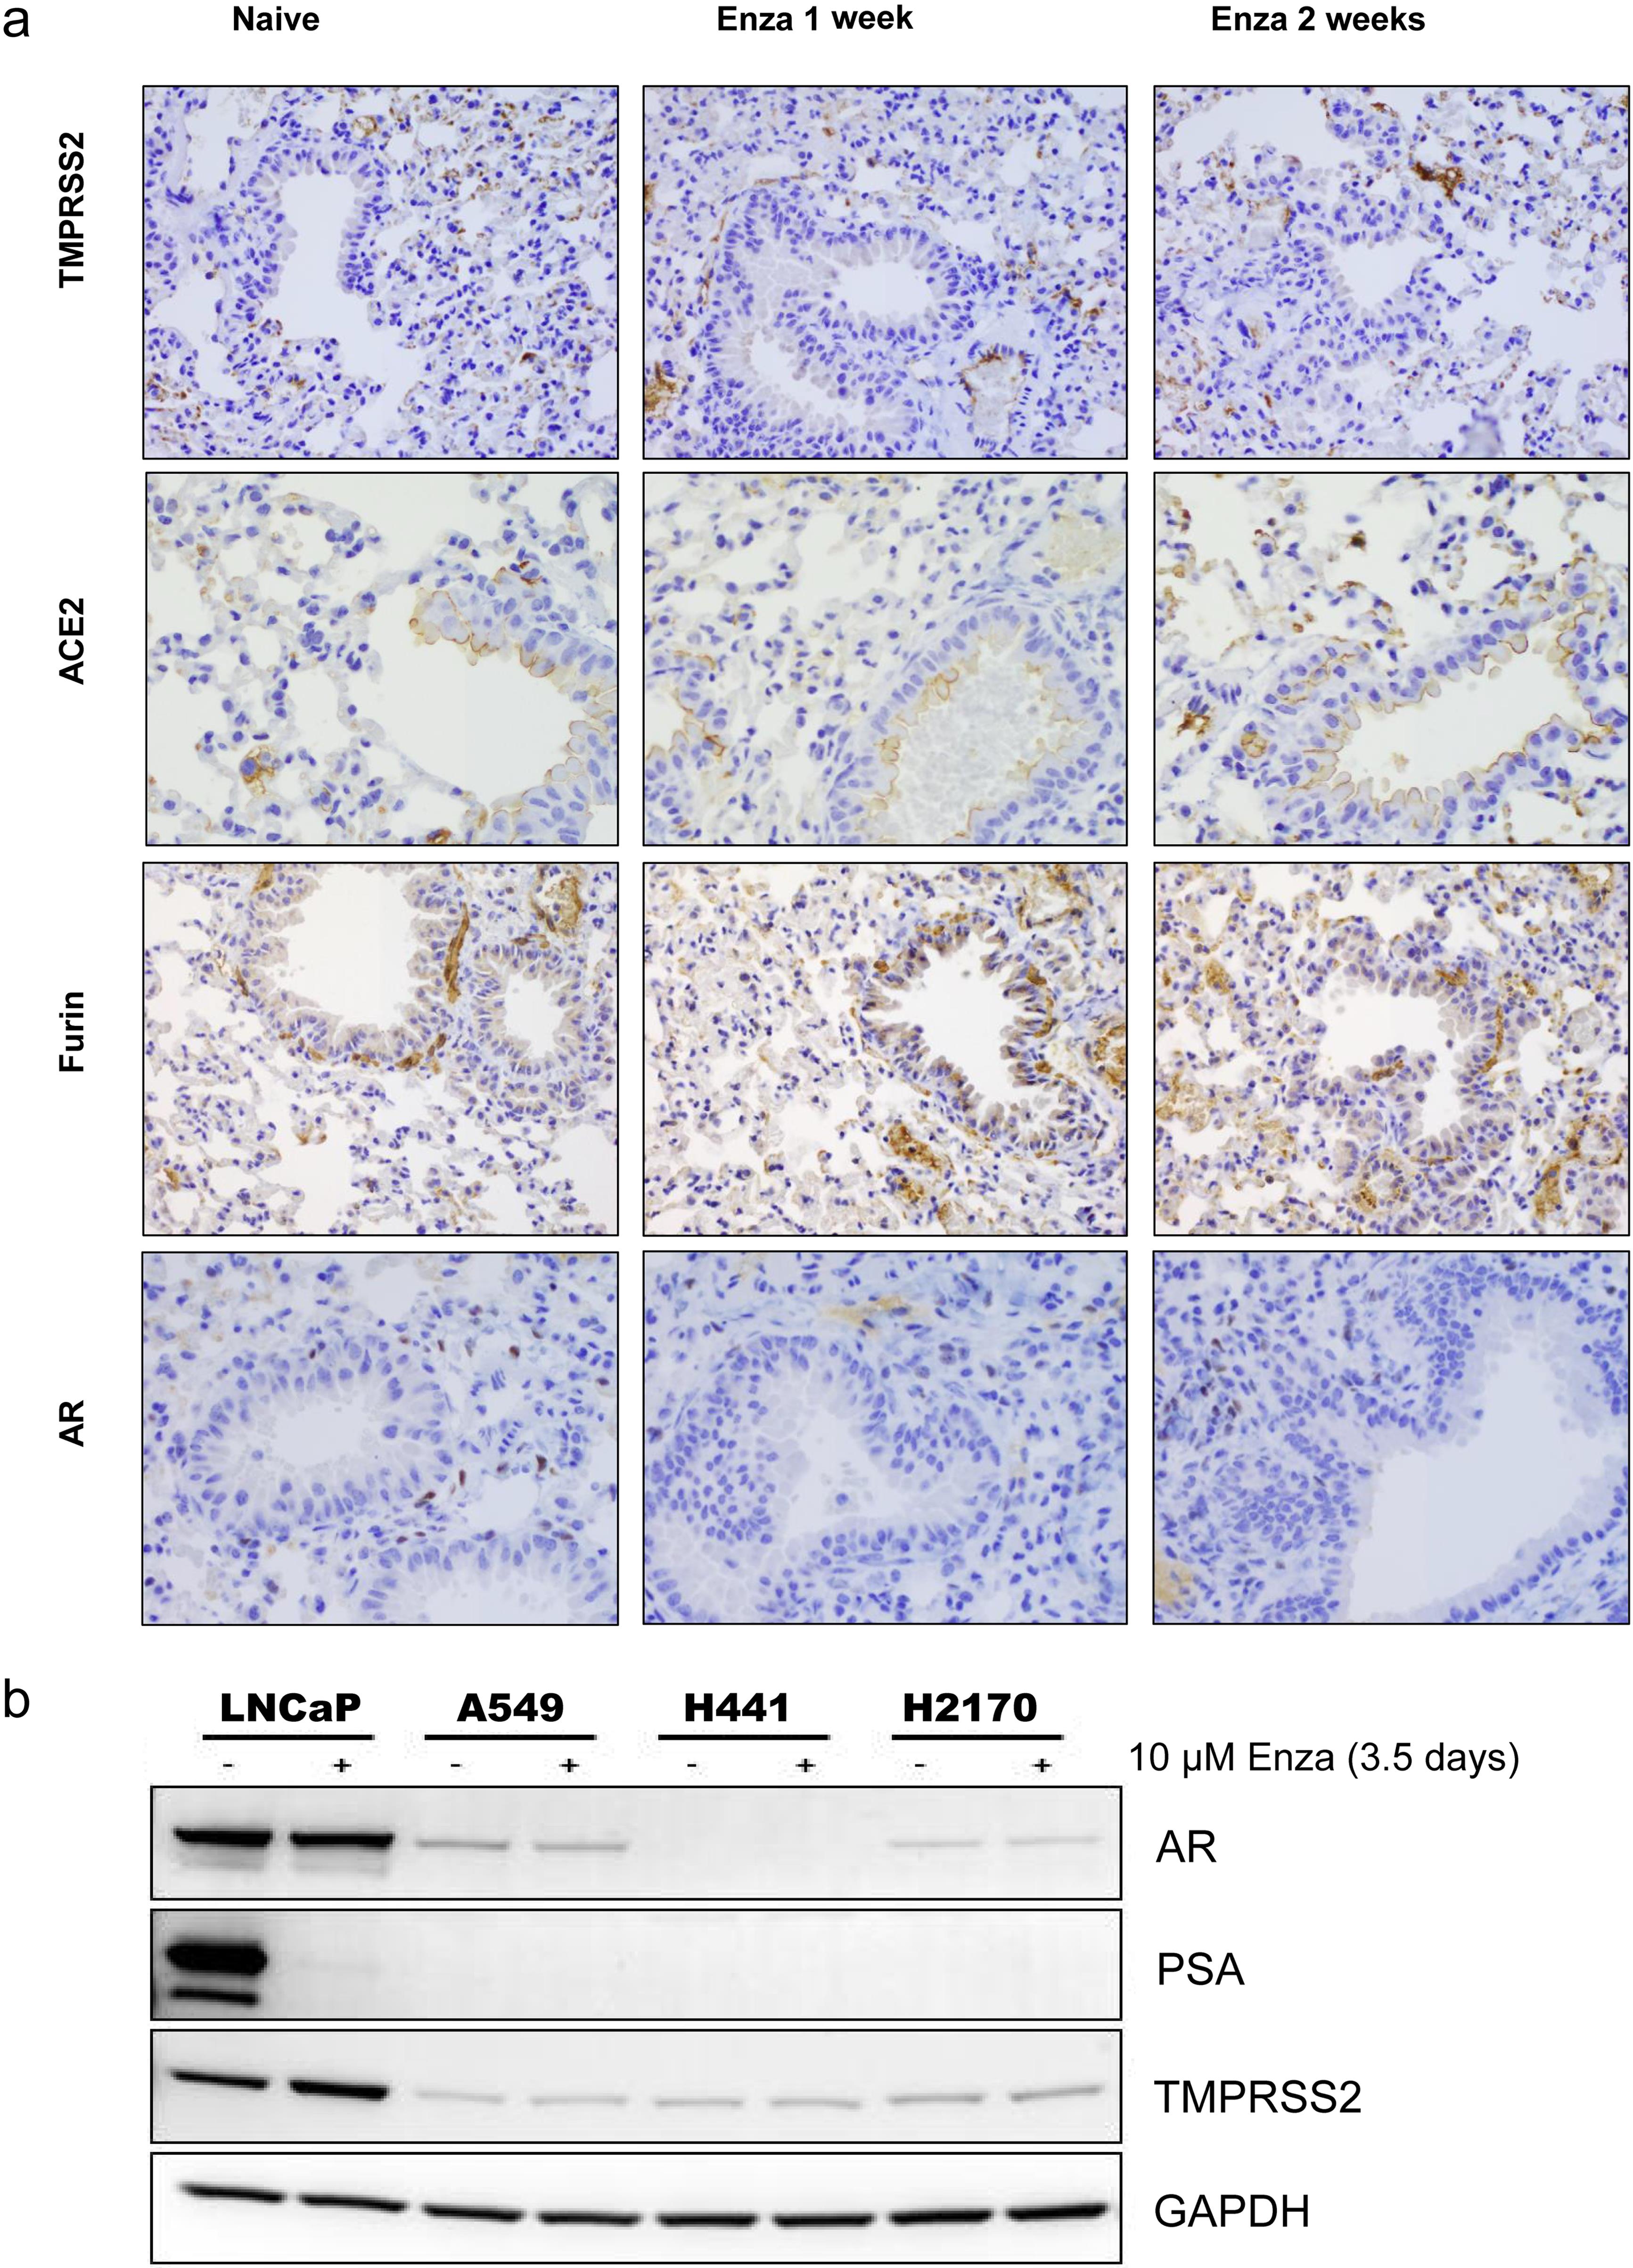 Androgen signaling showed no effect on regulating the expression of viral entry proteins in murine lungs.